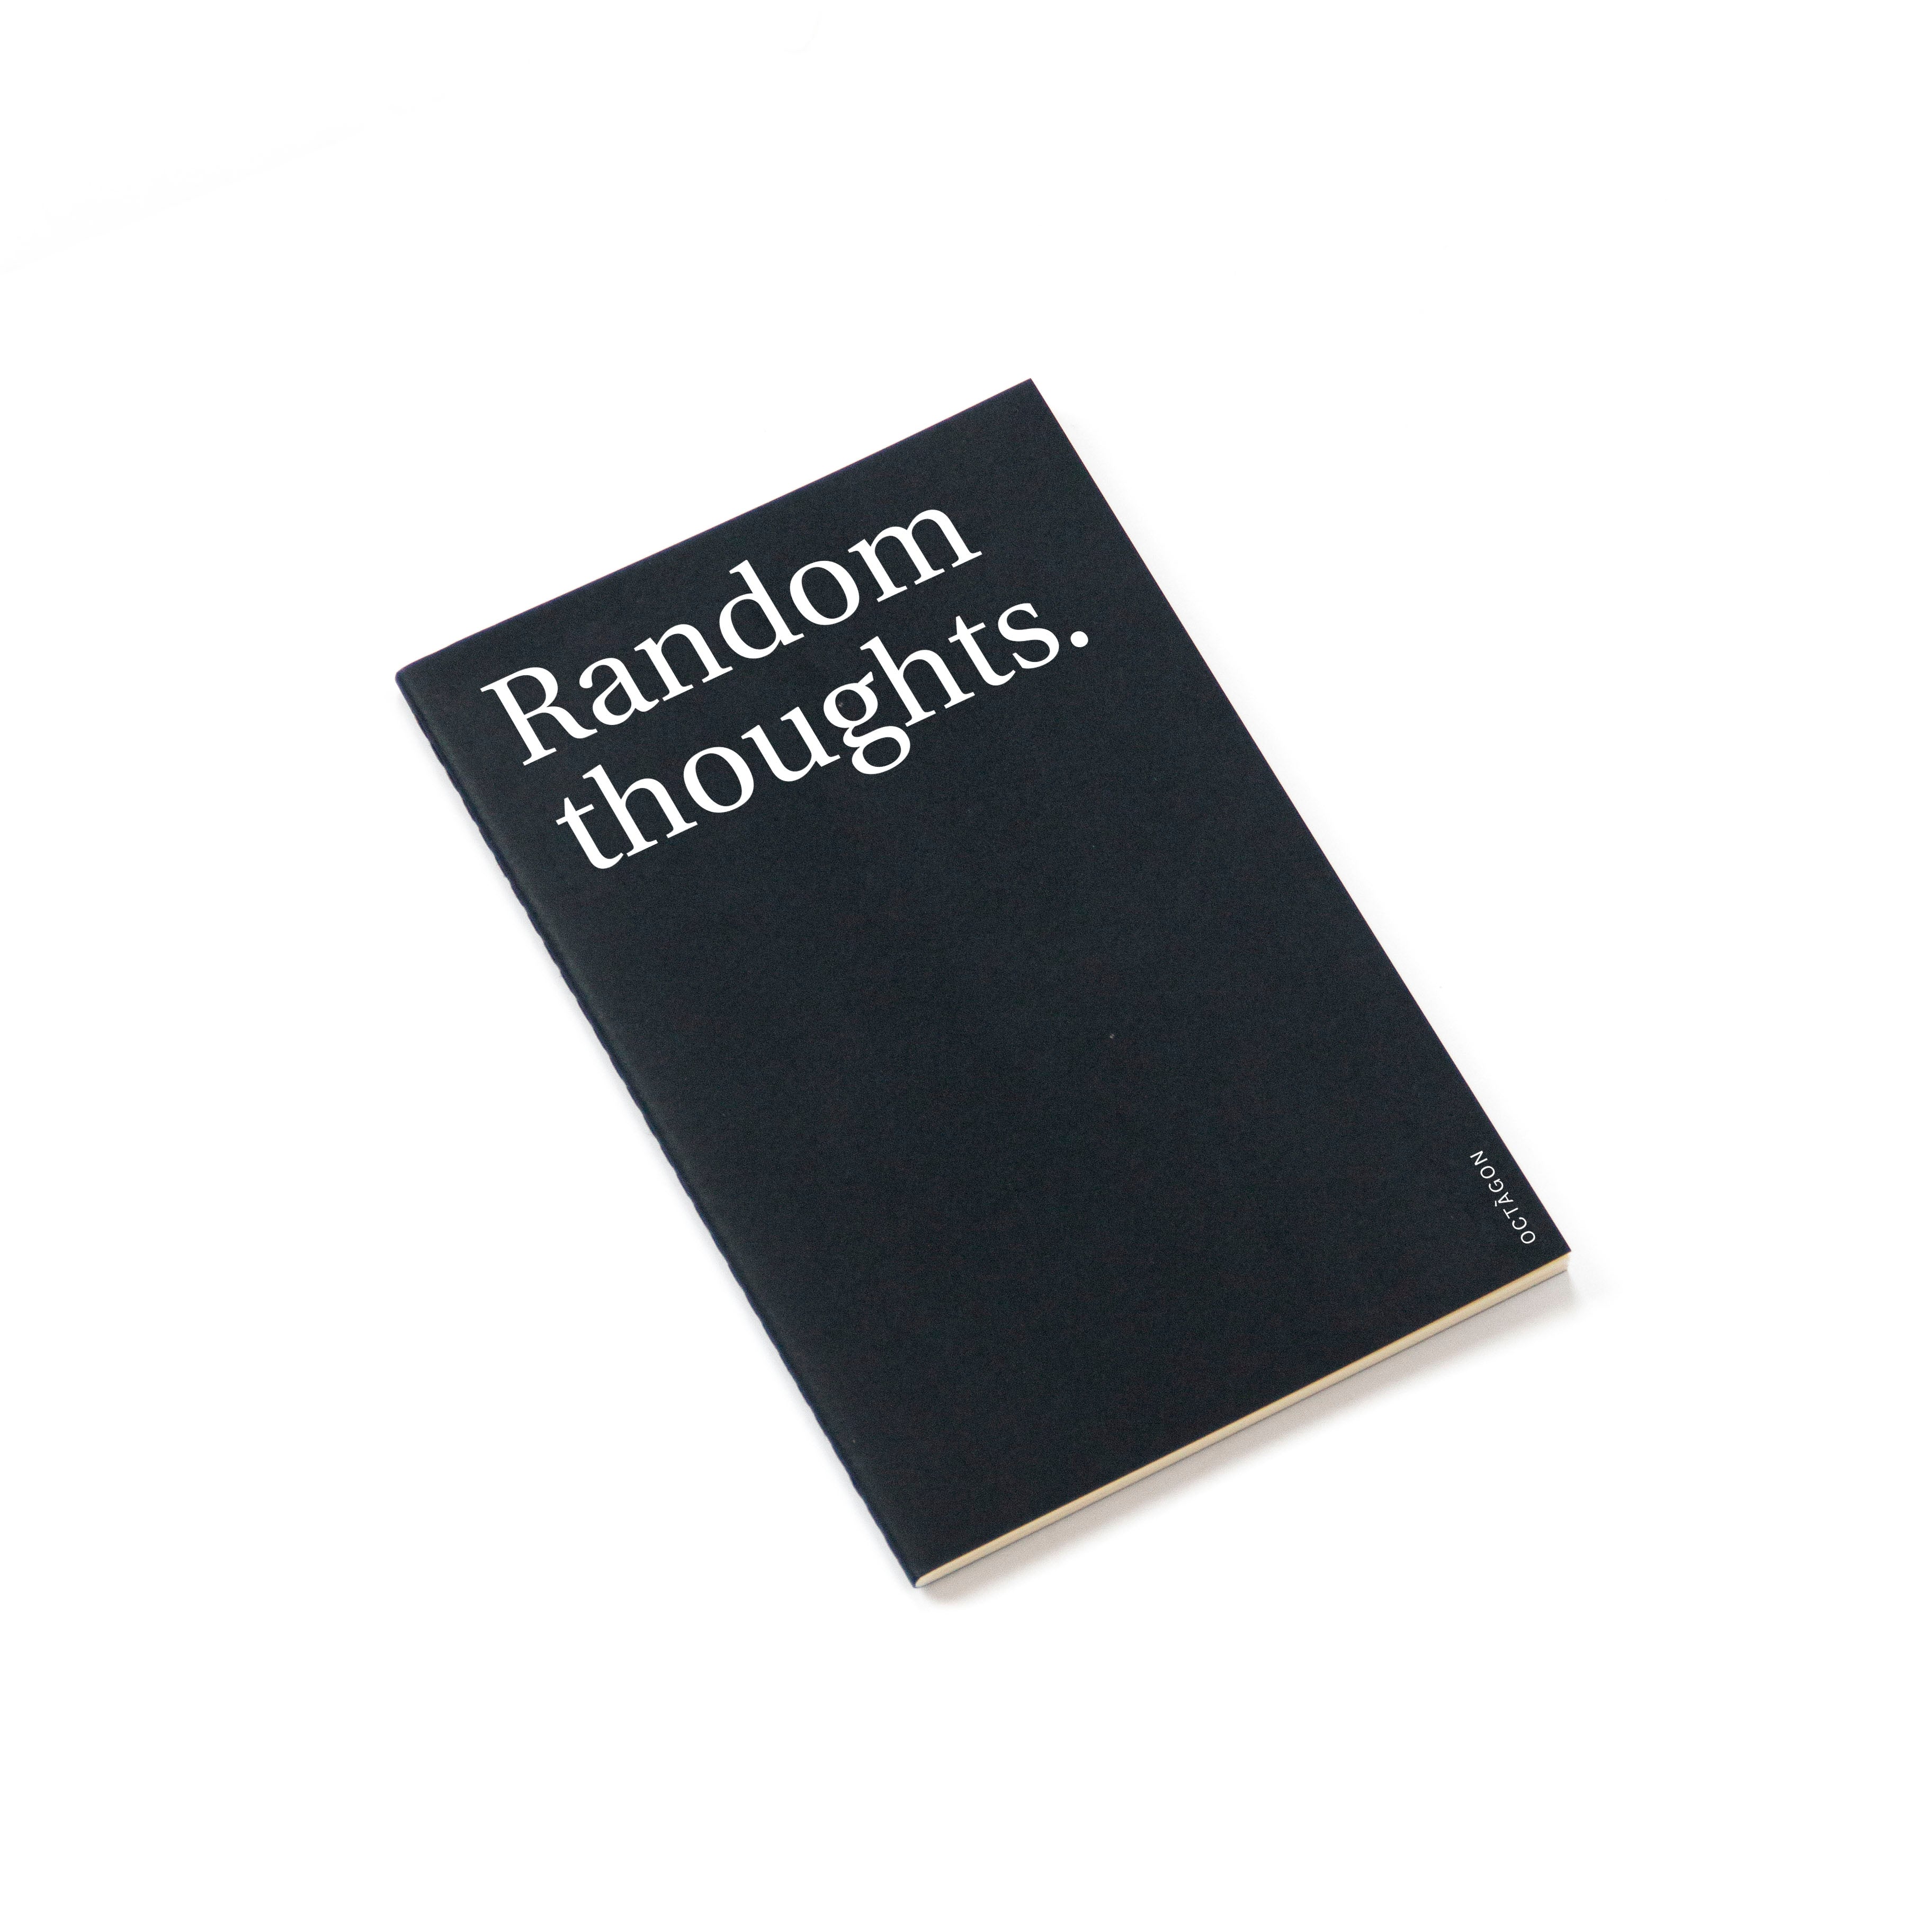 &quot;Random thoughts&quot; thin notebook. Cover black color and white typography.